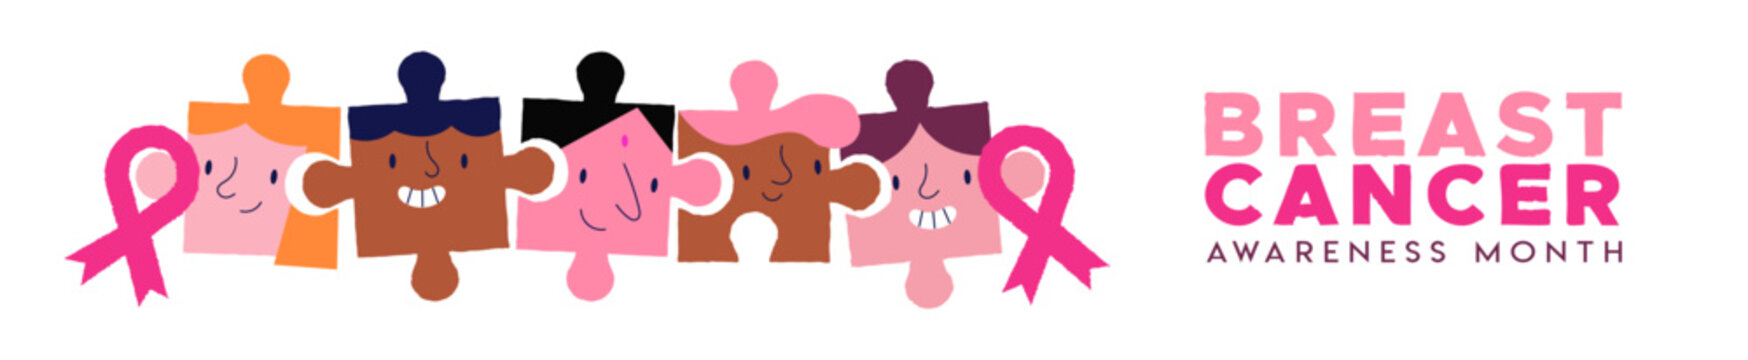 Breast Cancer Awareness month pink friend together puzzle banner